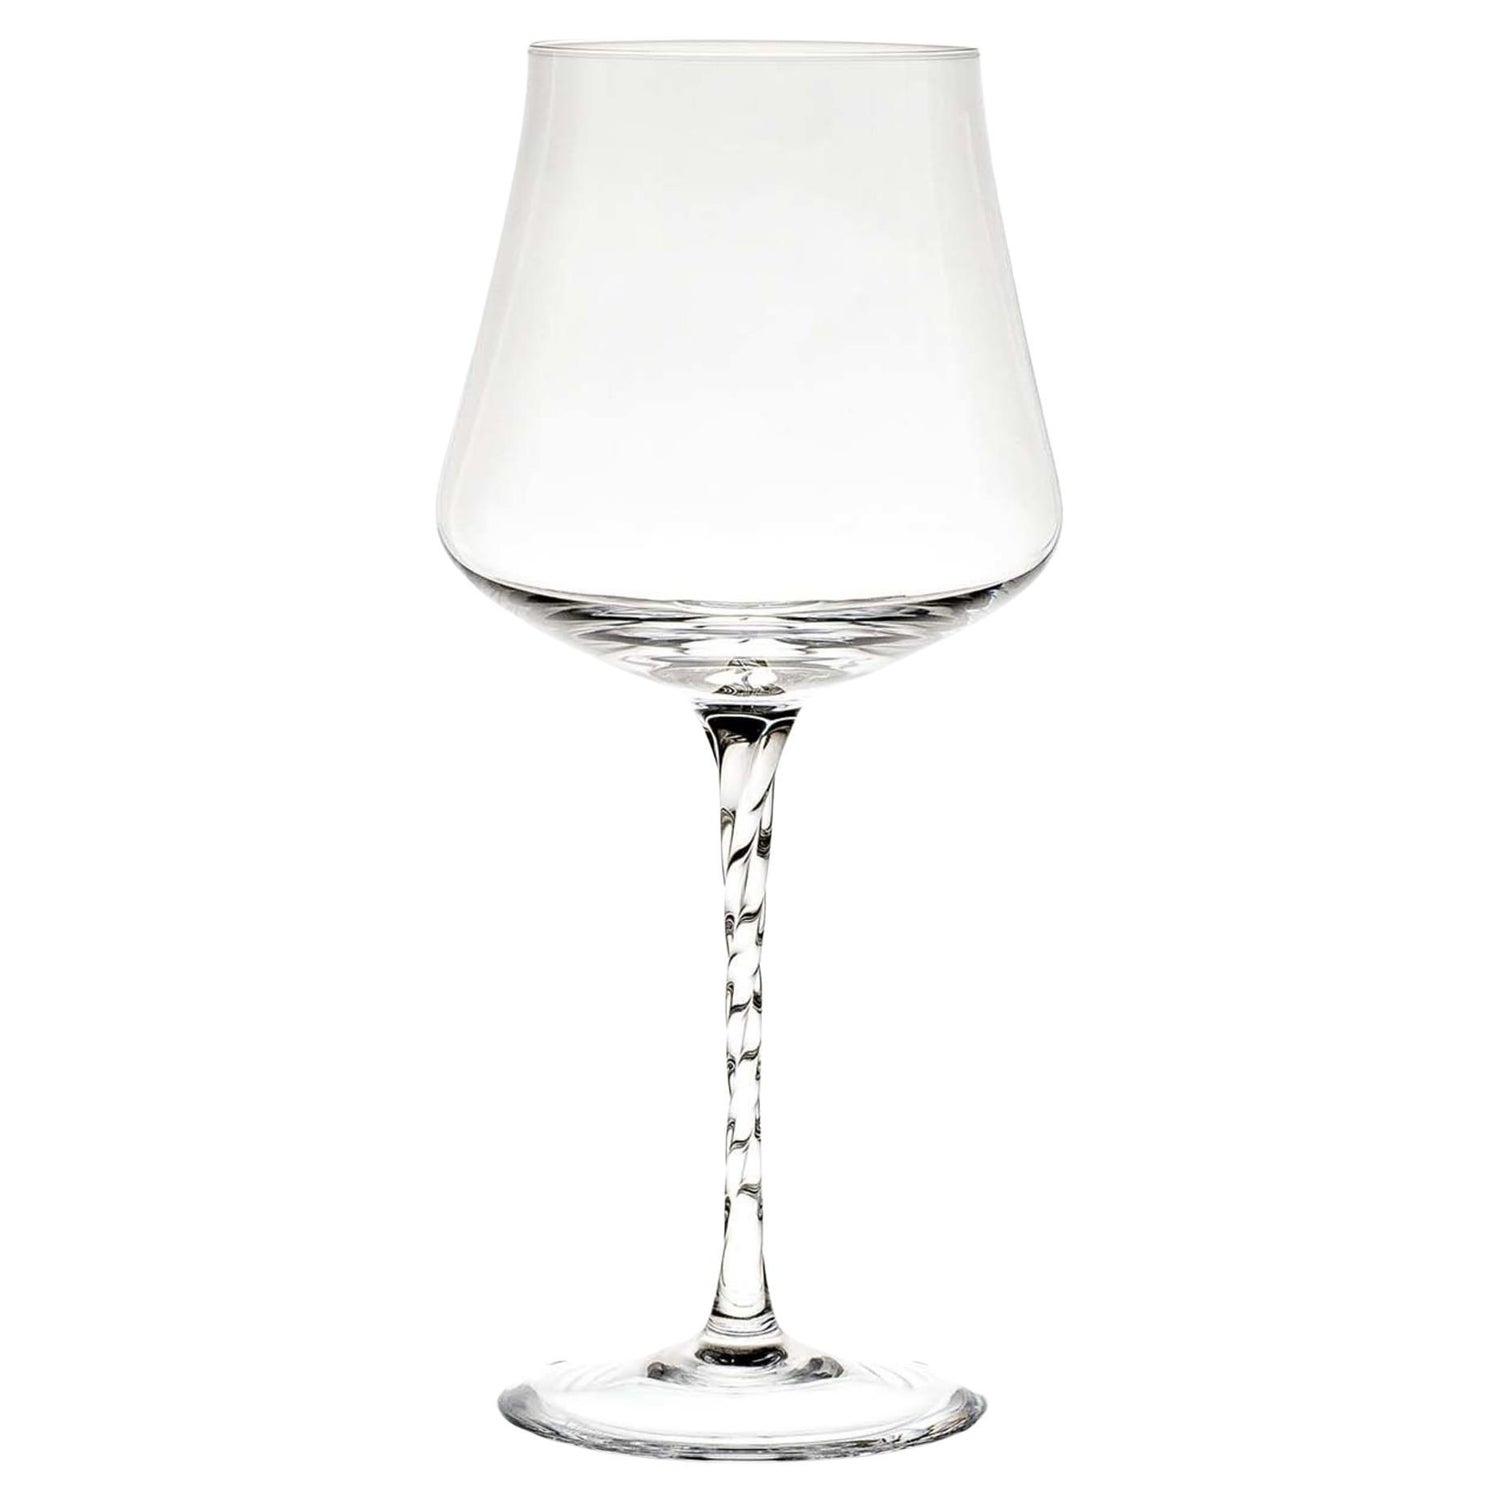 https://a.1stdibscdn.com/beviamo-set-of-6-water-glasses-with-twisted-stem-for-sale/f_17062/f_375582421702546367470/f_37558242_1702546367834_bg_processed.jpg?width=1500